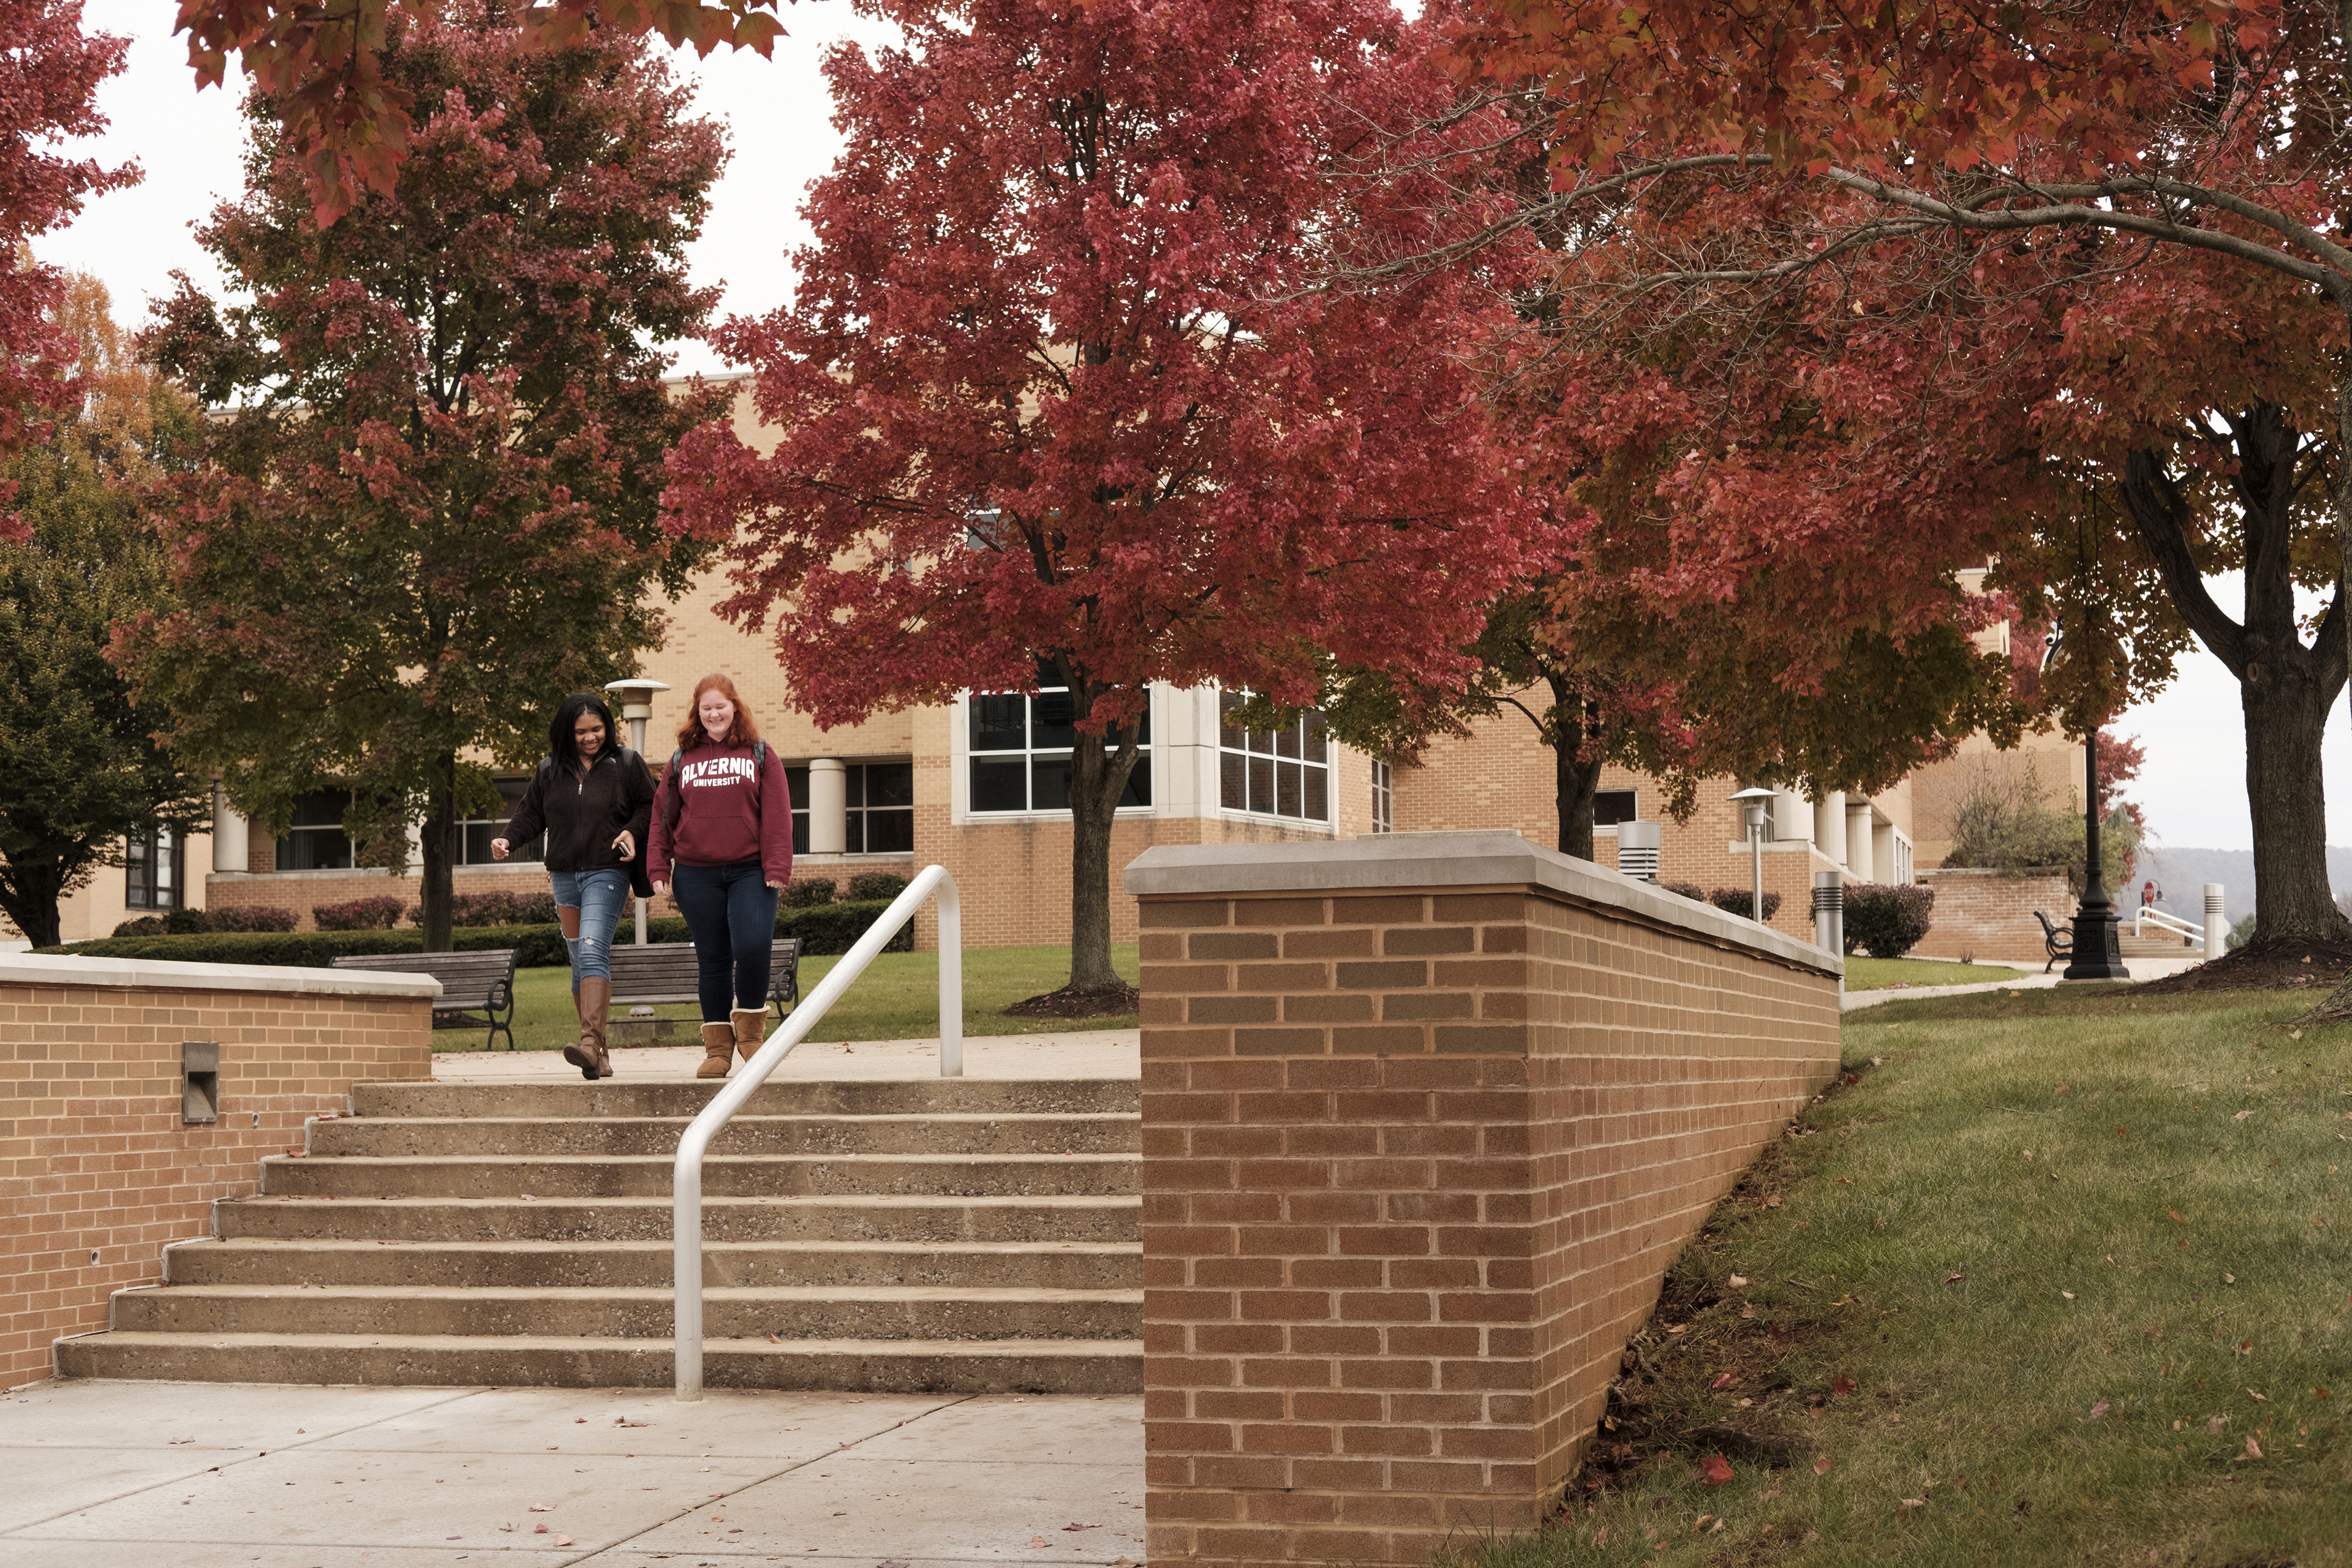 Students walking to class in the fall